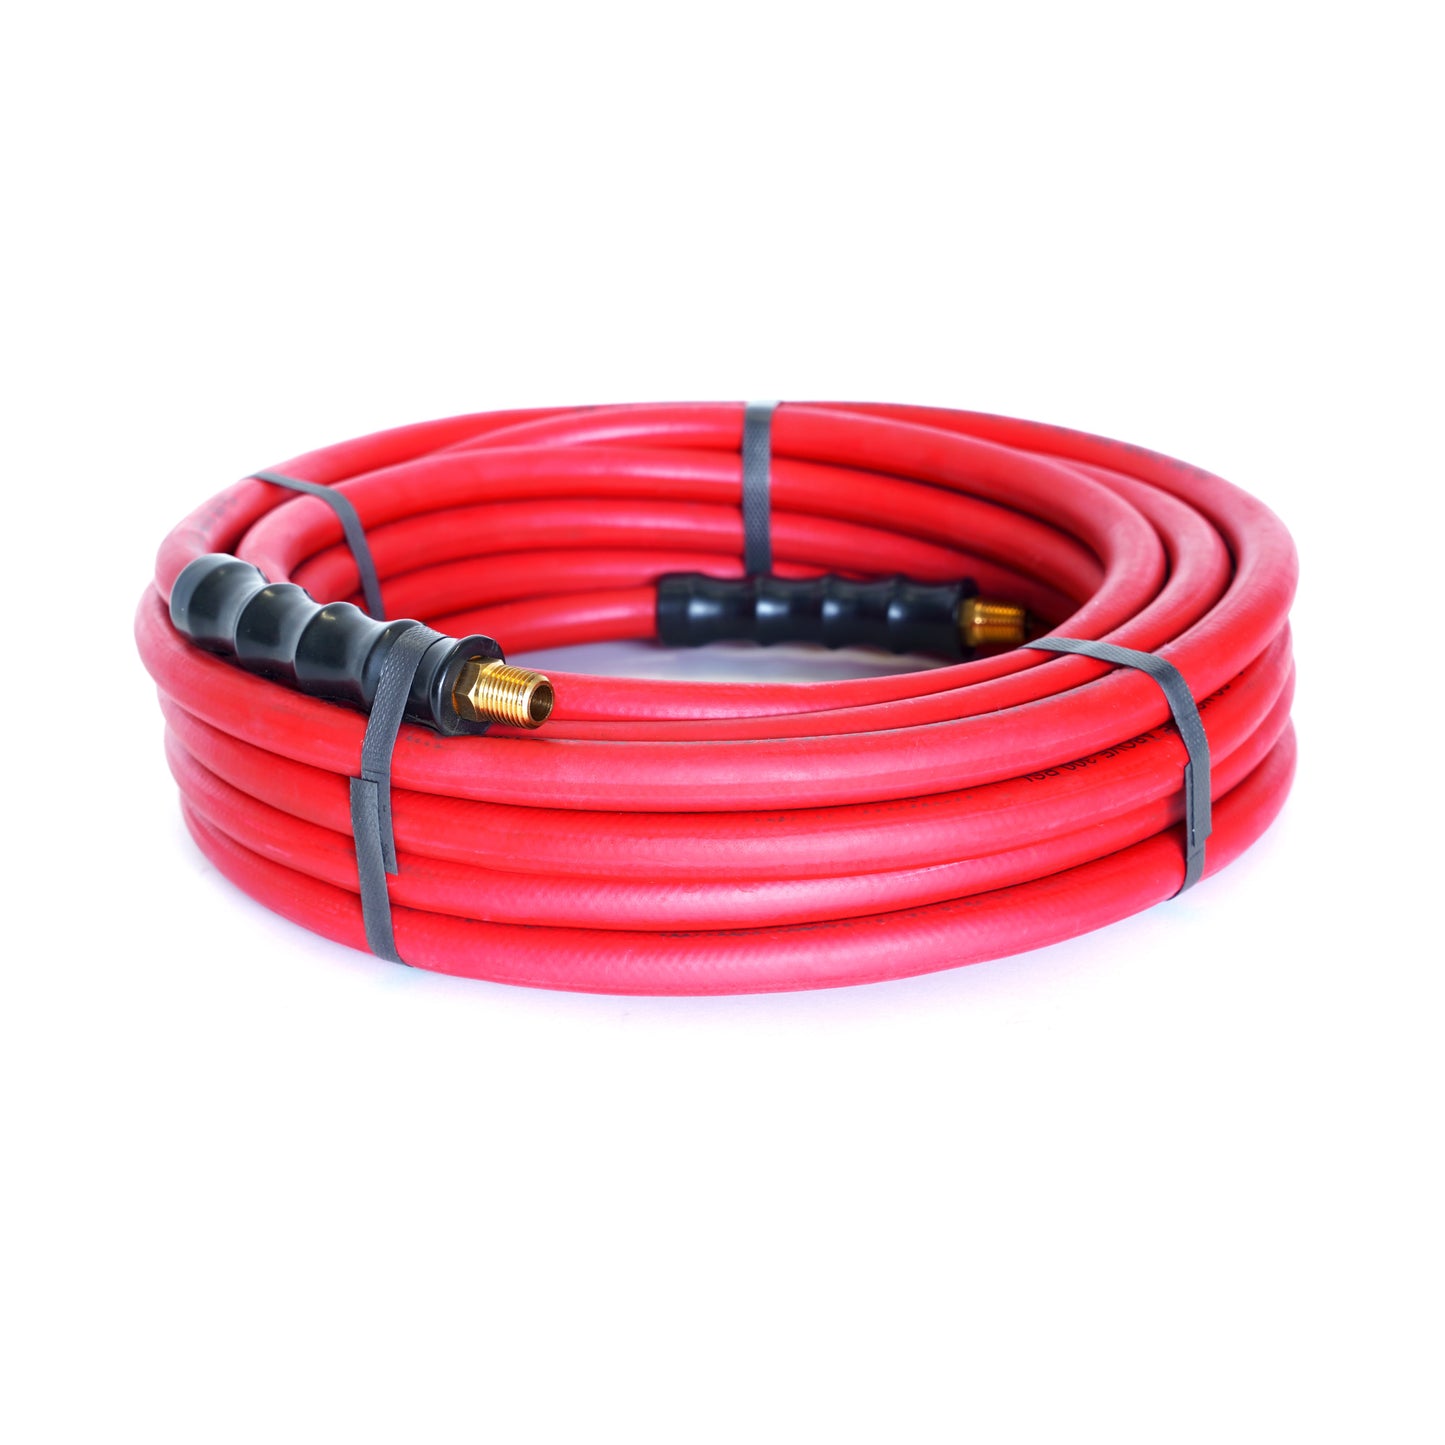 35-Foot 3/8-Inch ID Rubber Air Hose with 1/4-Inch NPT Brass Fittings